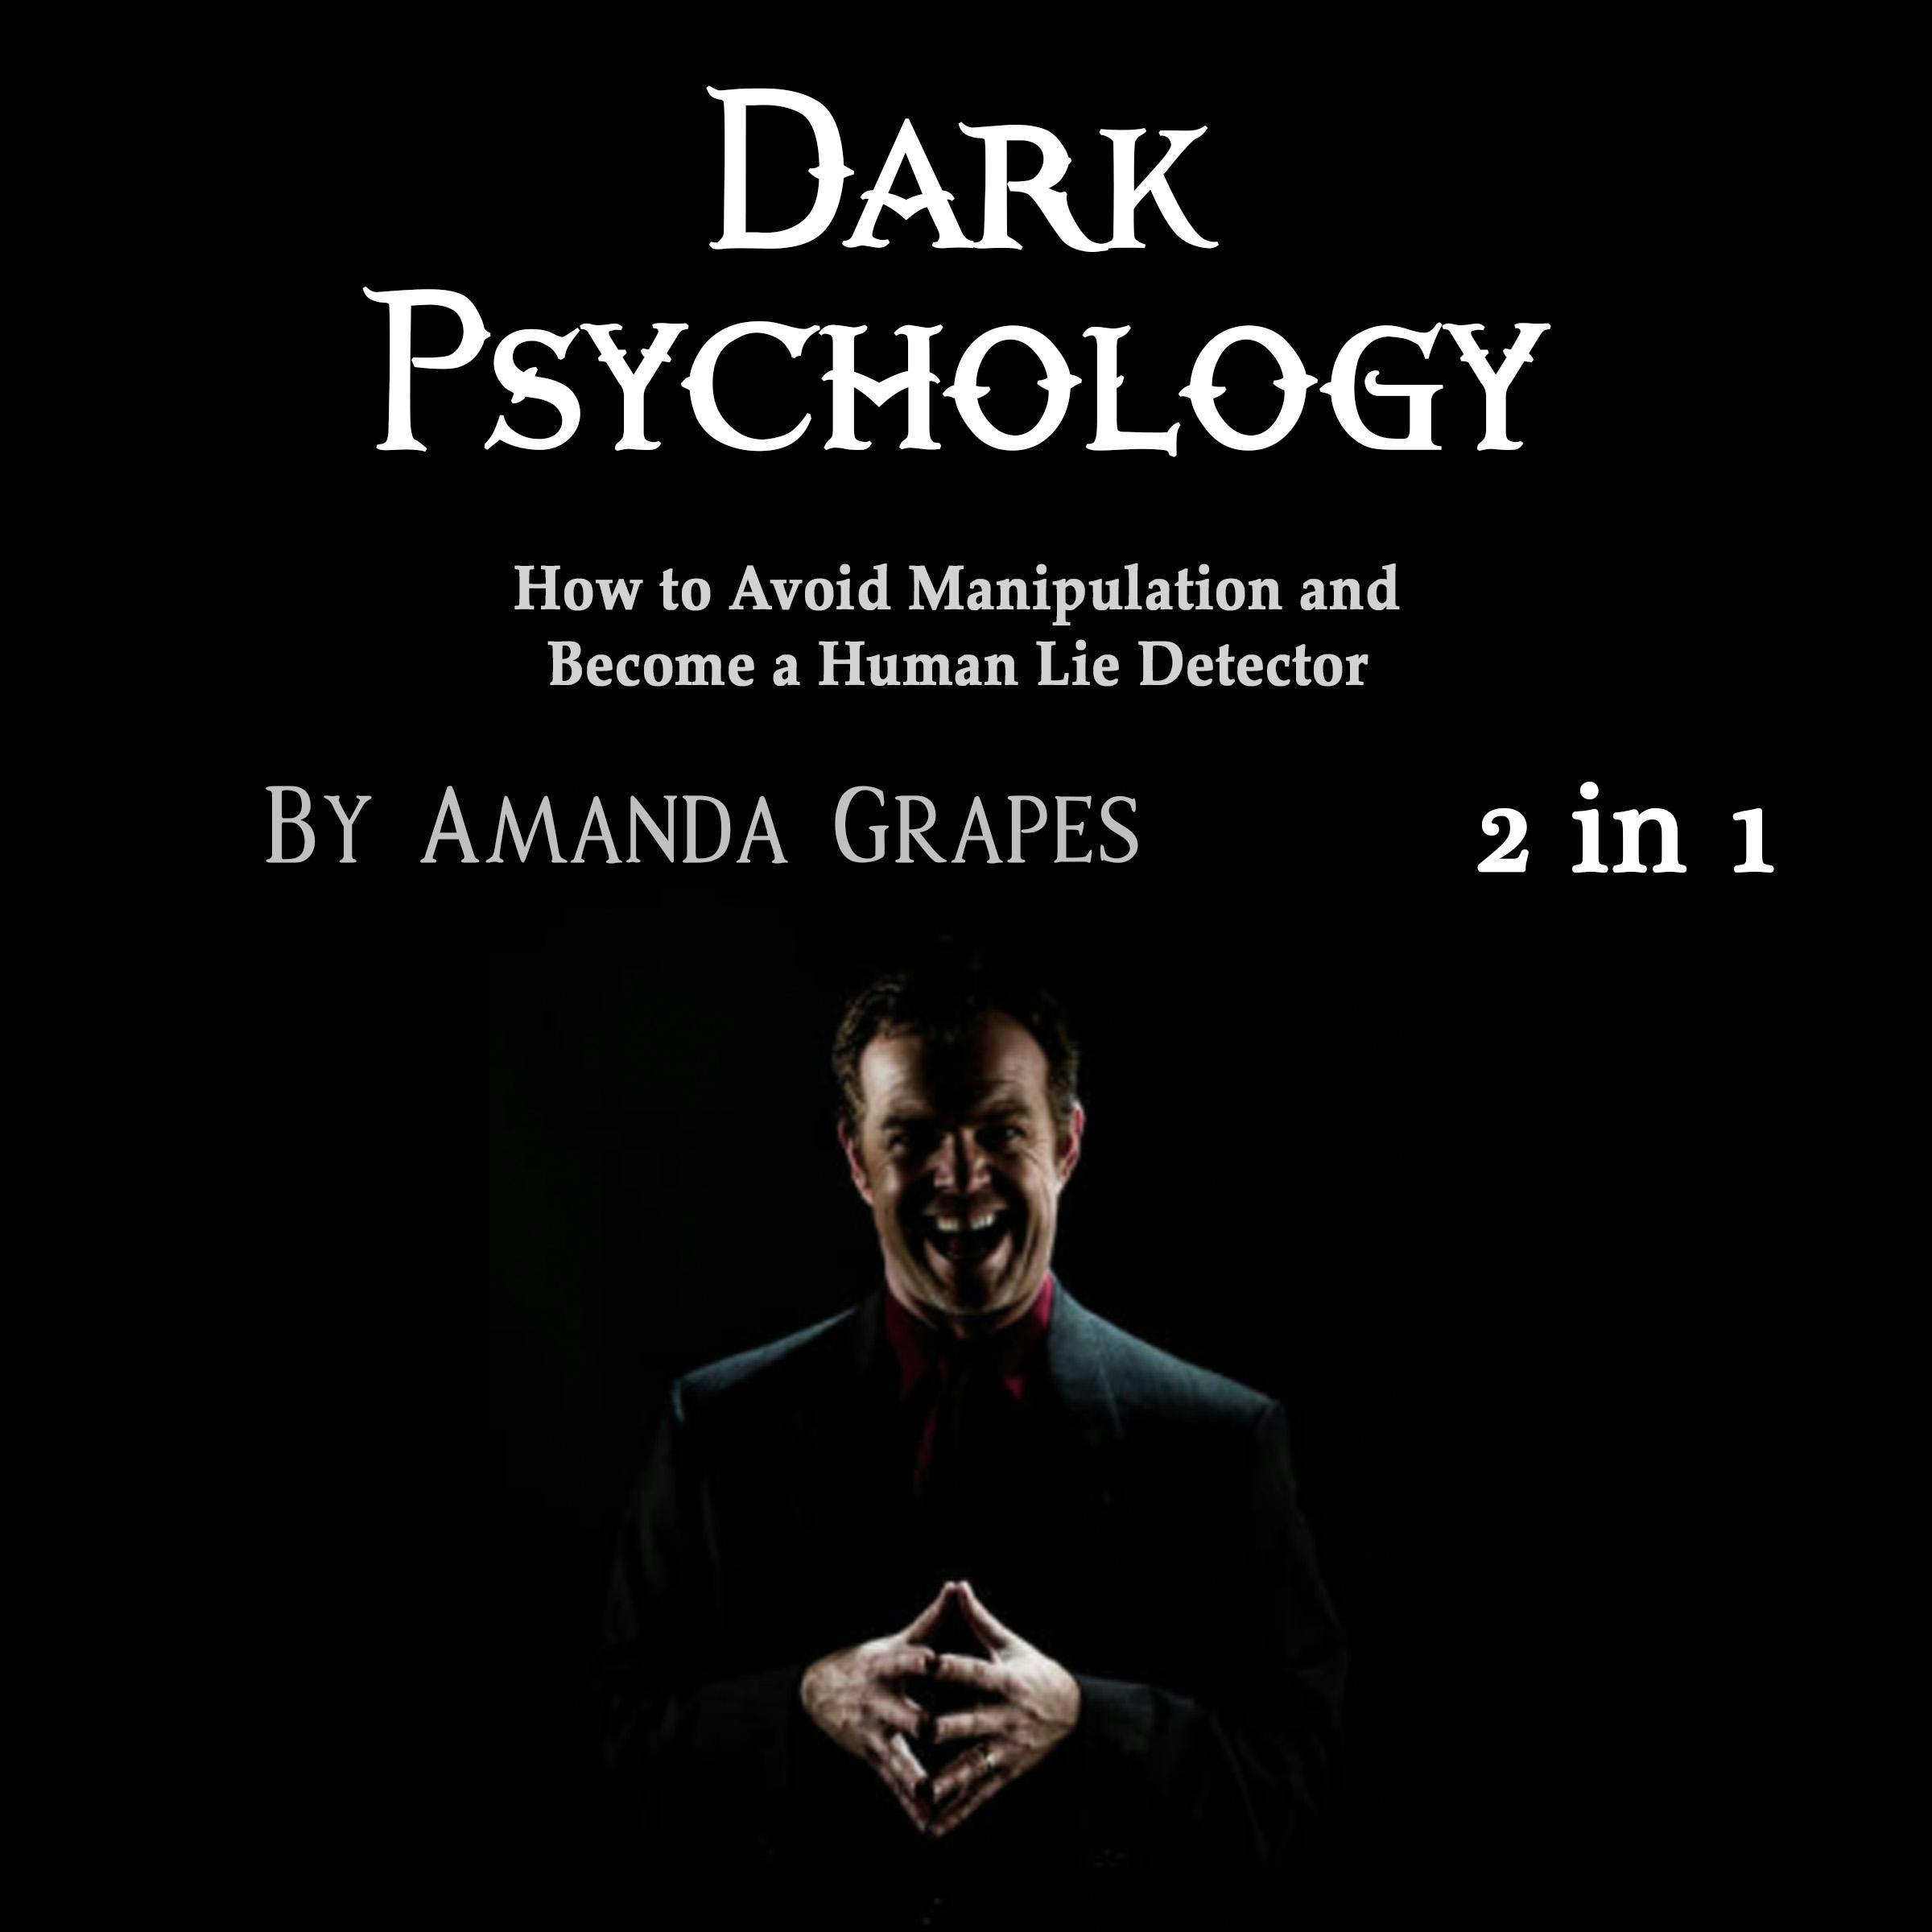 Dark Psychology: How to Avoid Manipulation and Become a Human Lie Detector - Amanda Grapes